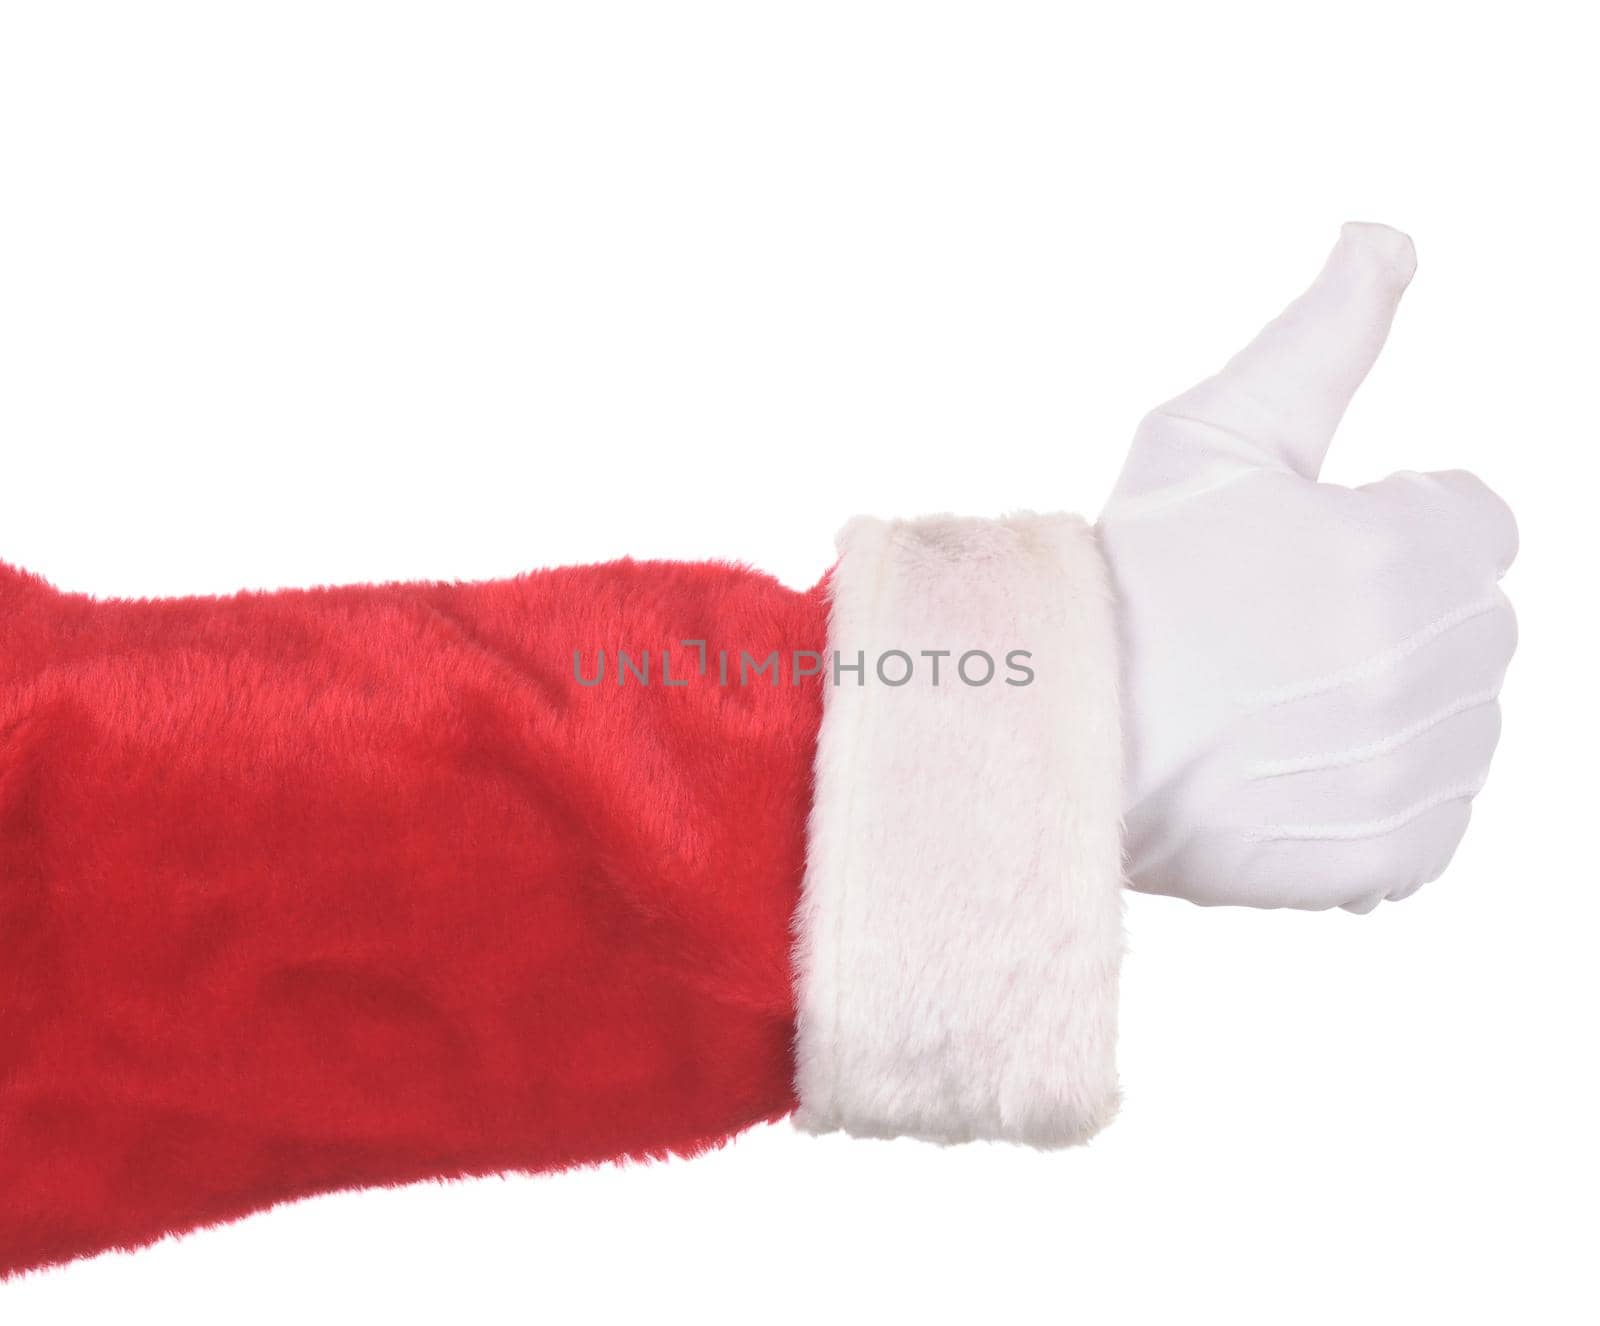 Santa Claus making thumbs up gesture isolated over white. Hand and arm only in horizontal format.